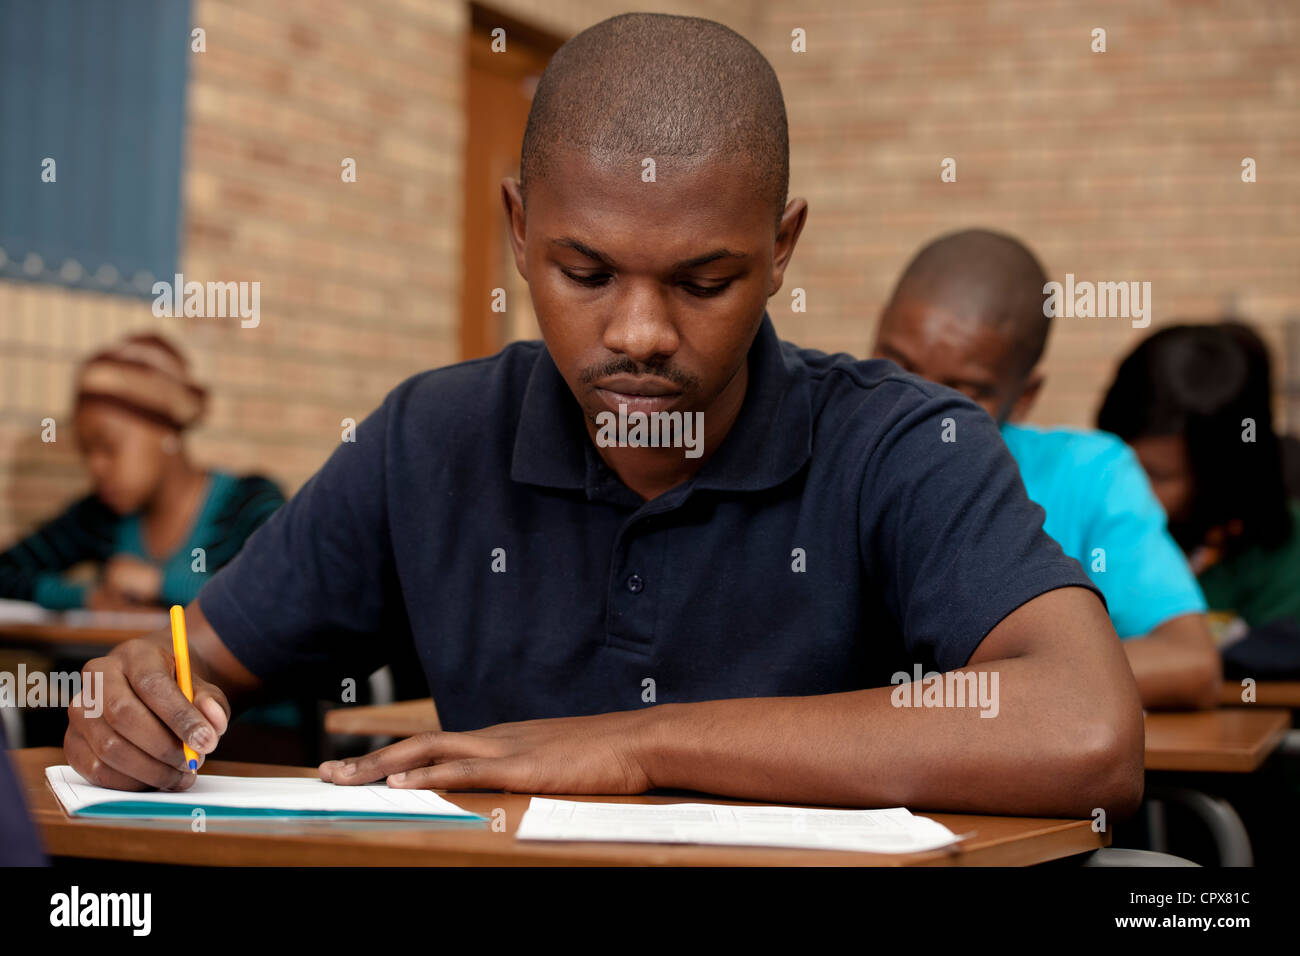 Male student working at a desk. Stock Photo